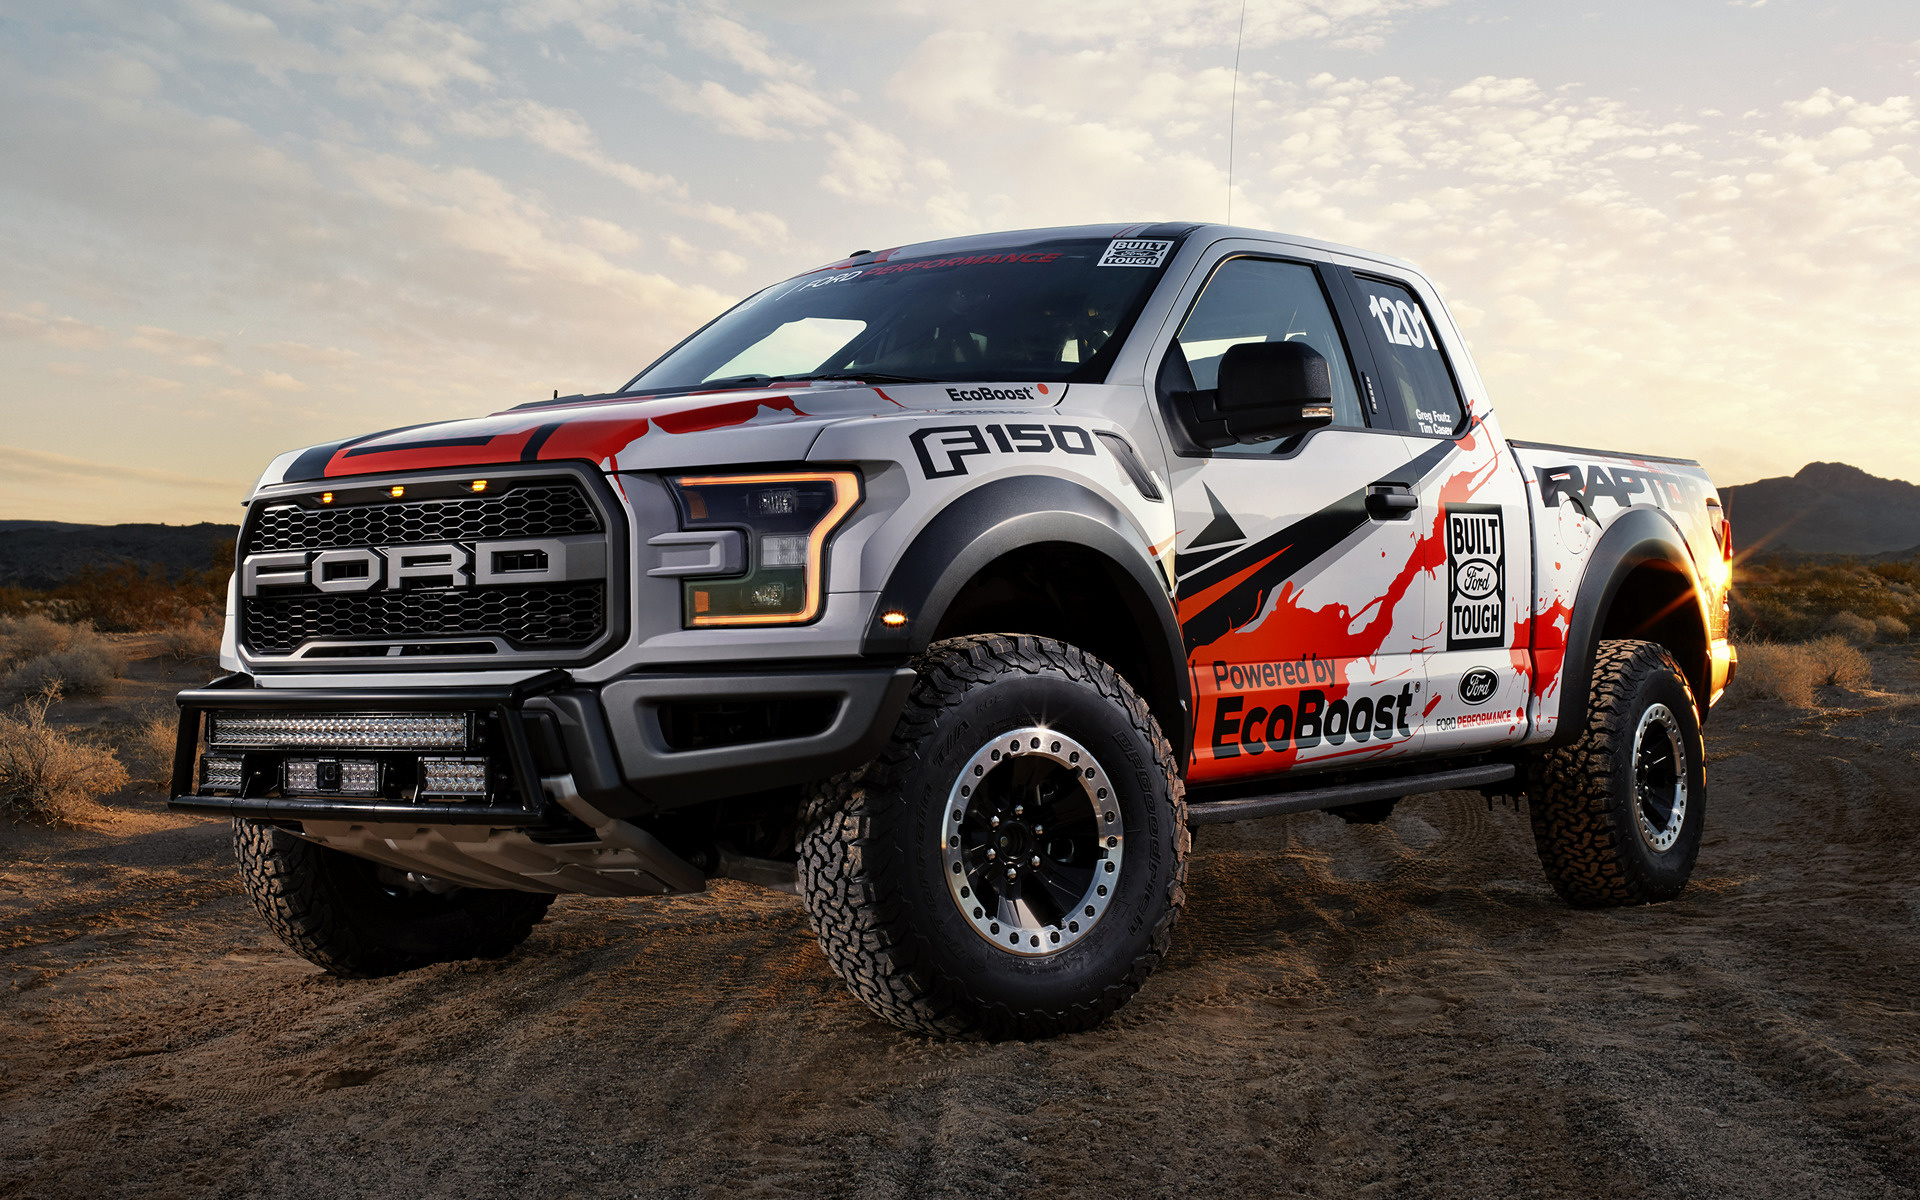 Free Download 2017 Ford F 150 Raptor Race Truck Wallpapers And Hd Images Car 1920x1200 For Your Desktop Mobile Tablet Explore 39 Ford F 150 Wallpapers Ford F 150 Wallpaper